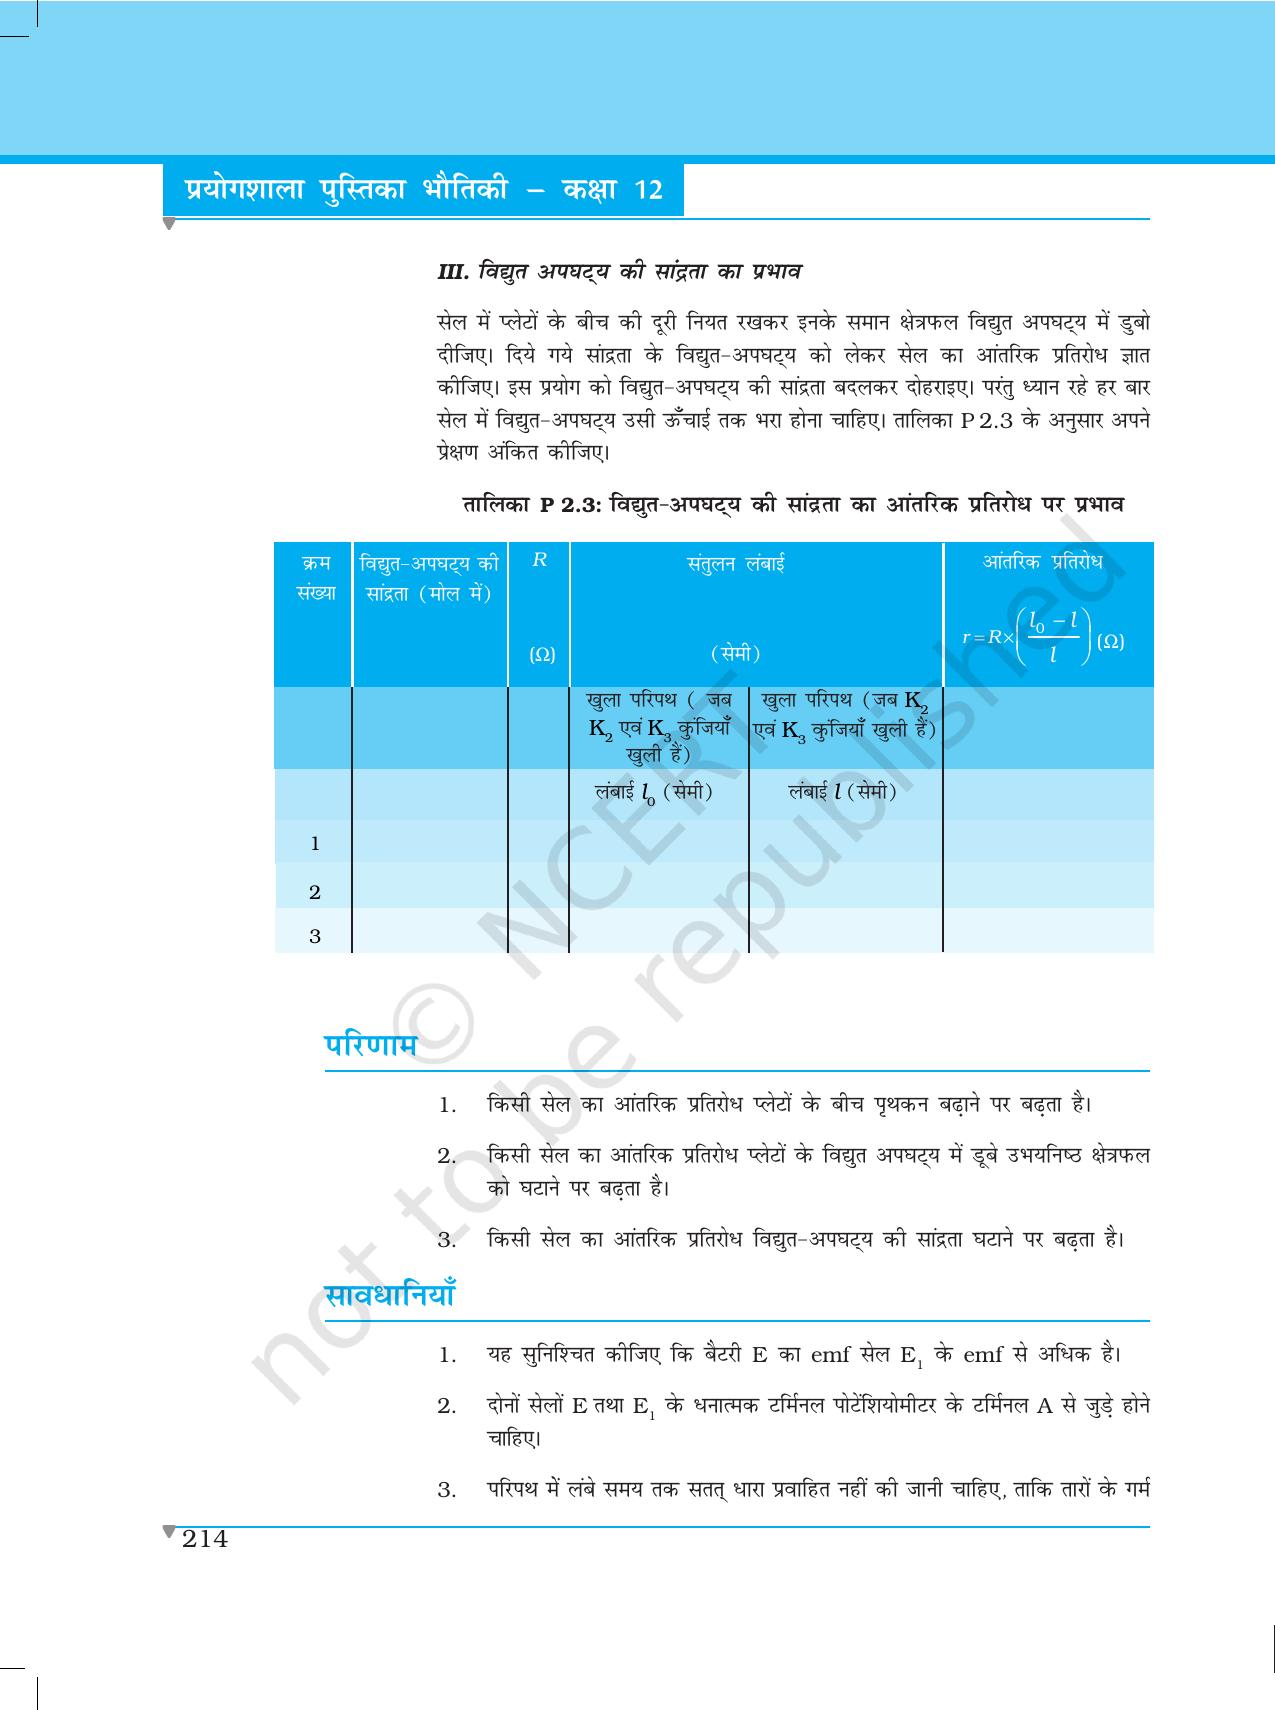 NCERT Laboratory Manuals for Class XII भौतिकी - परियोजना (1 - 7) - Page 8